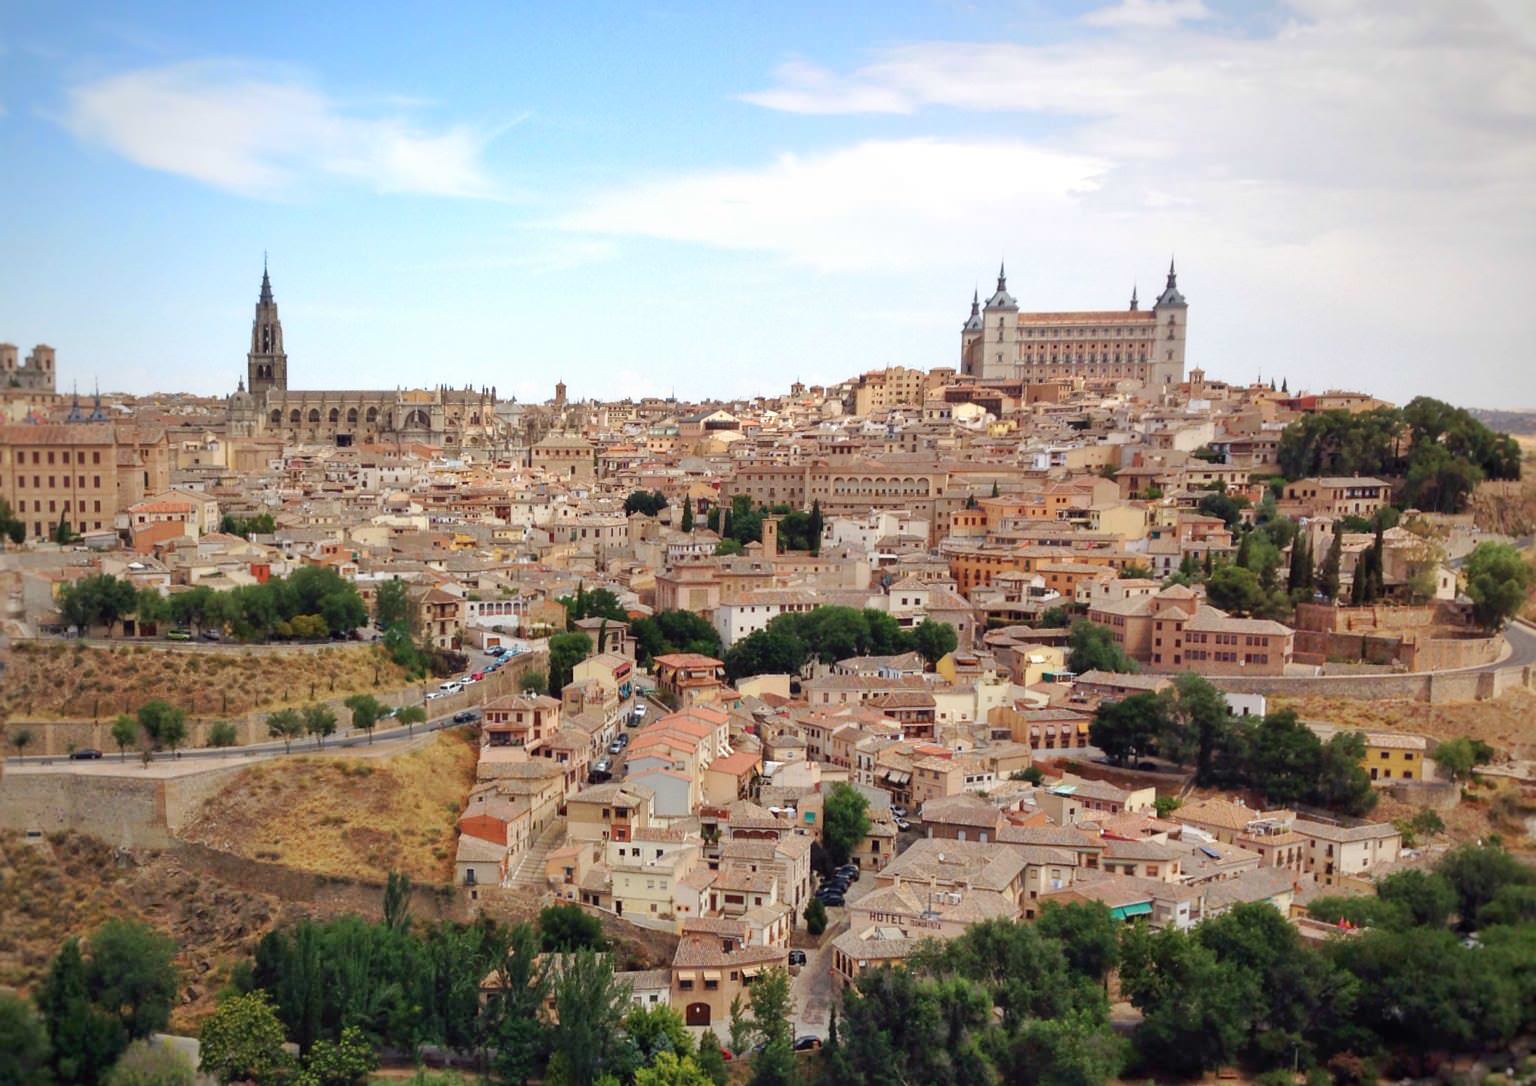 Toledo is such a beautiful city!